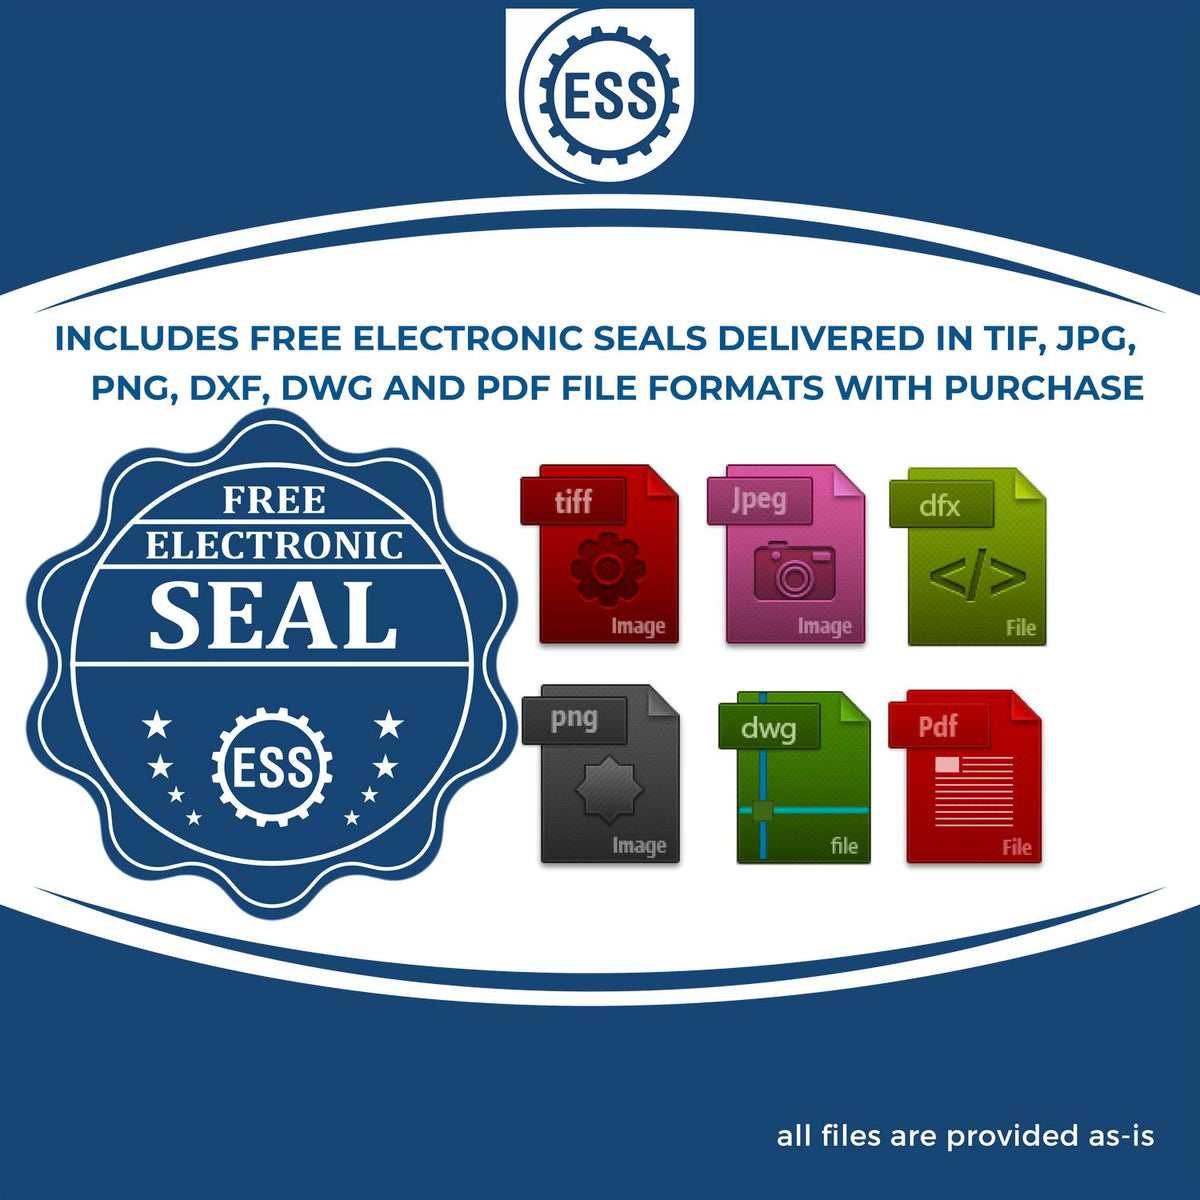 An infographic for the free electronic seal for the Slim Pre-Inked State Seal Notary Stamp for North Carolina illustrating the different file type icons such as DXF, DWG, TIF, JPG and PNG.